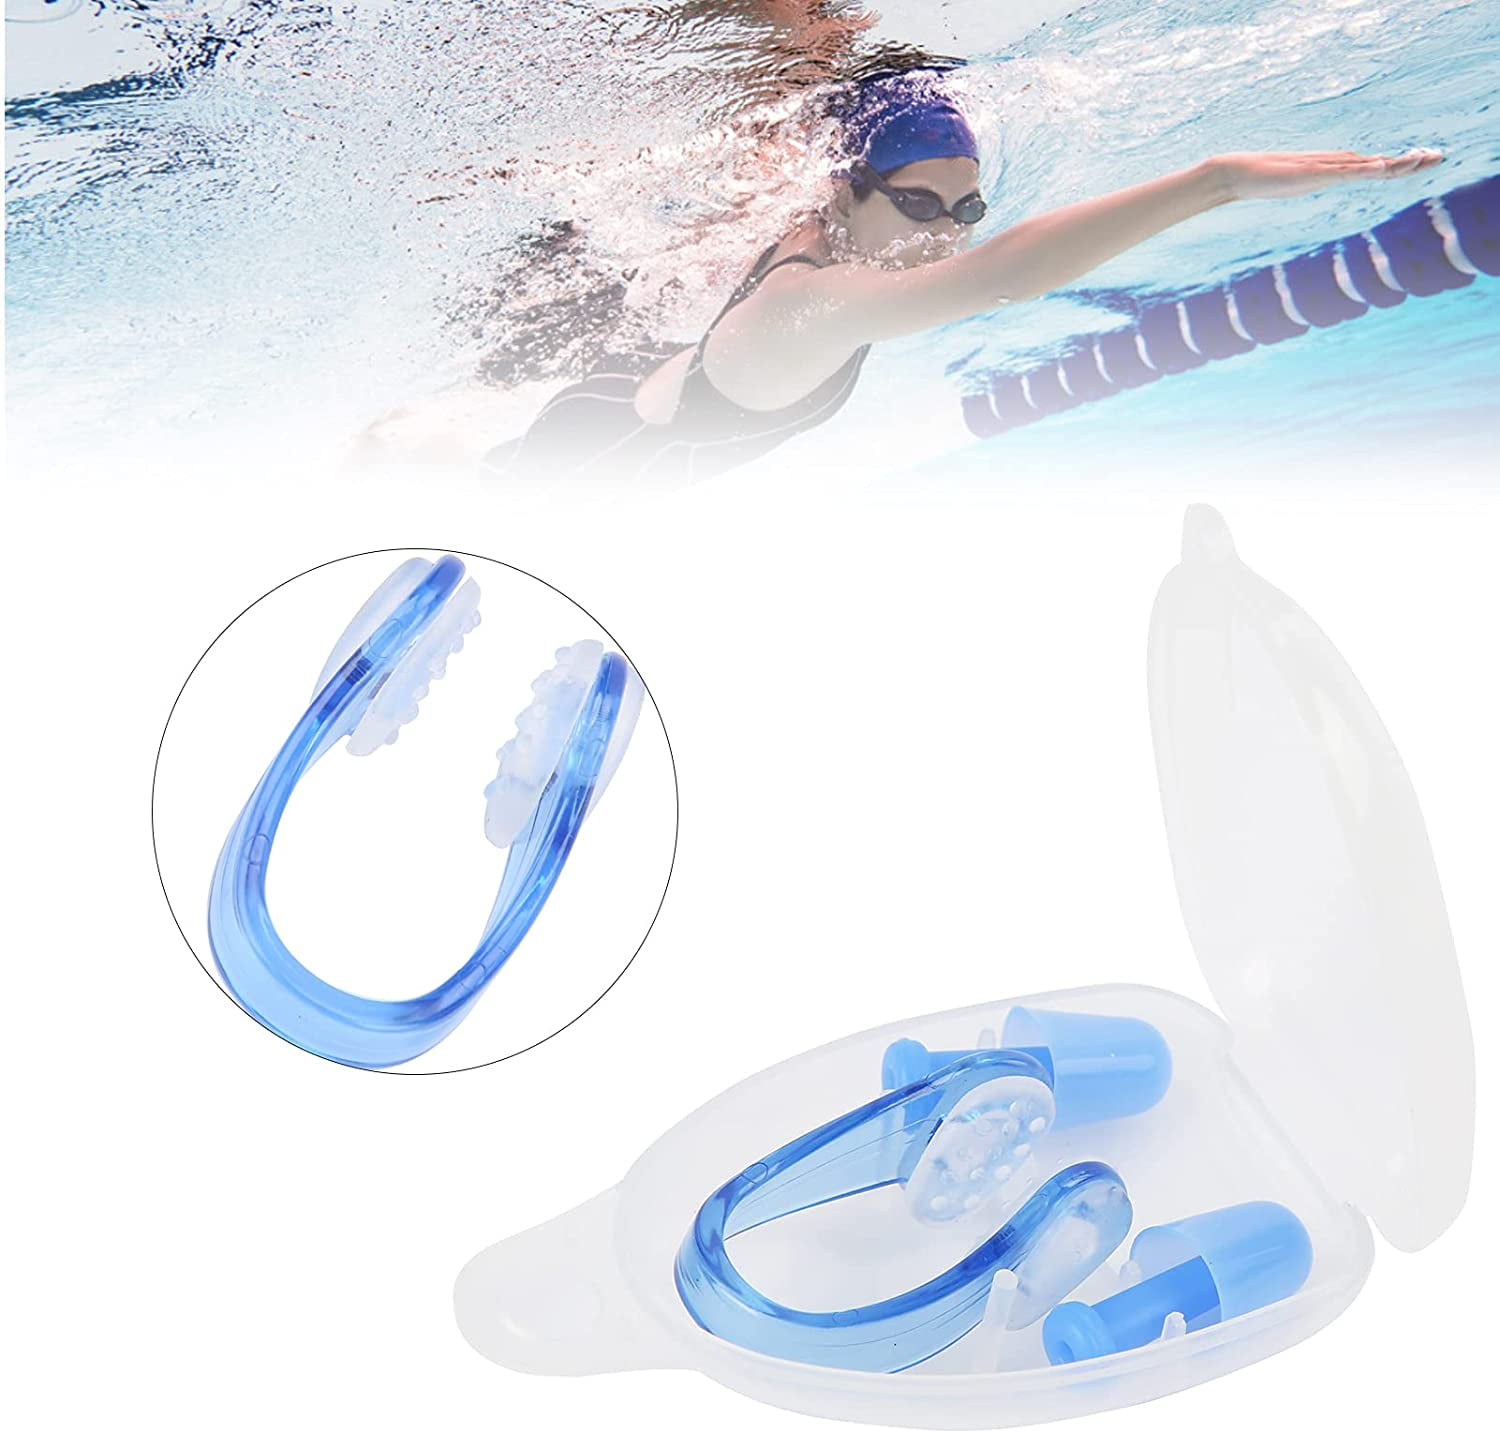 Waterproof Soft Silicone Swimming Diving Nose Clip+Ear Plug Set Best P*CA 